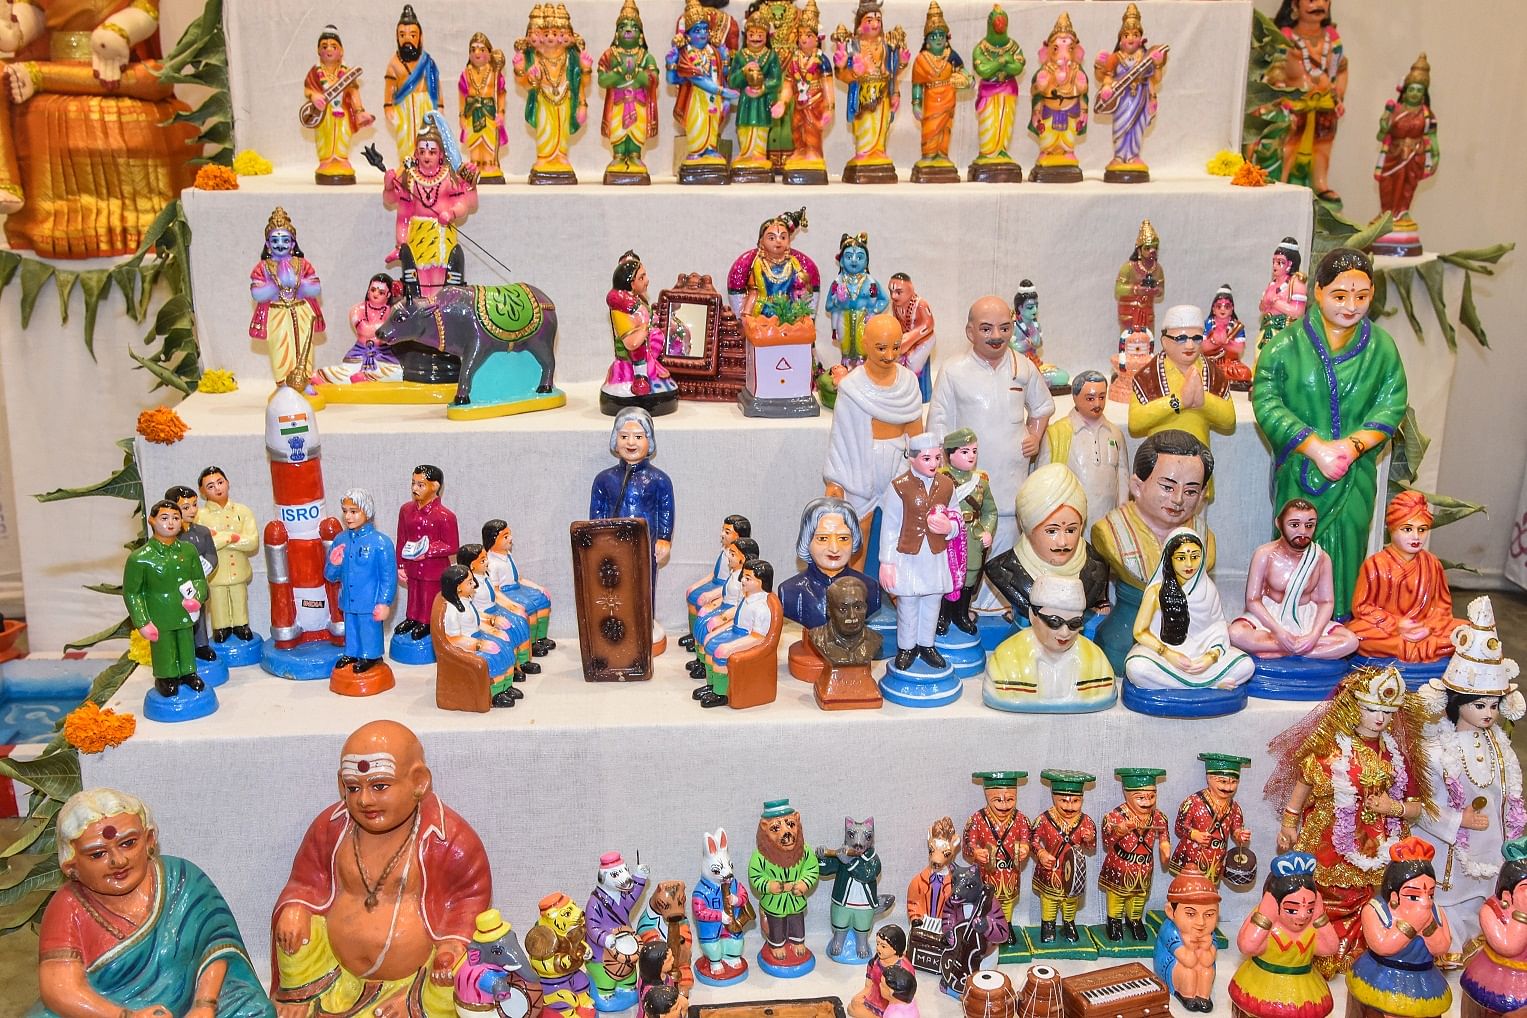 The display which has 2,000 dolls includes figurines of politicians and leaders. DH PHOTOS BY S K DINESH